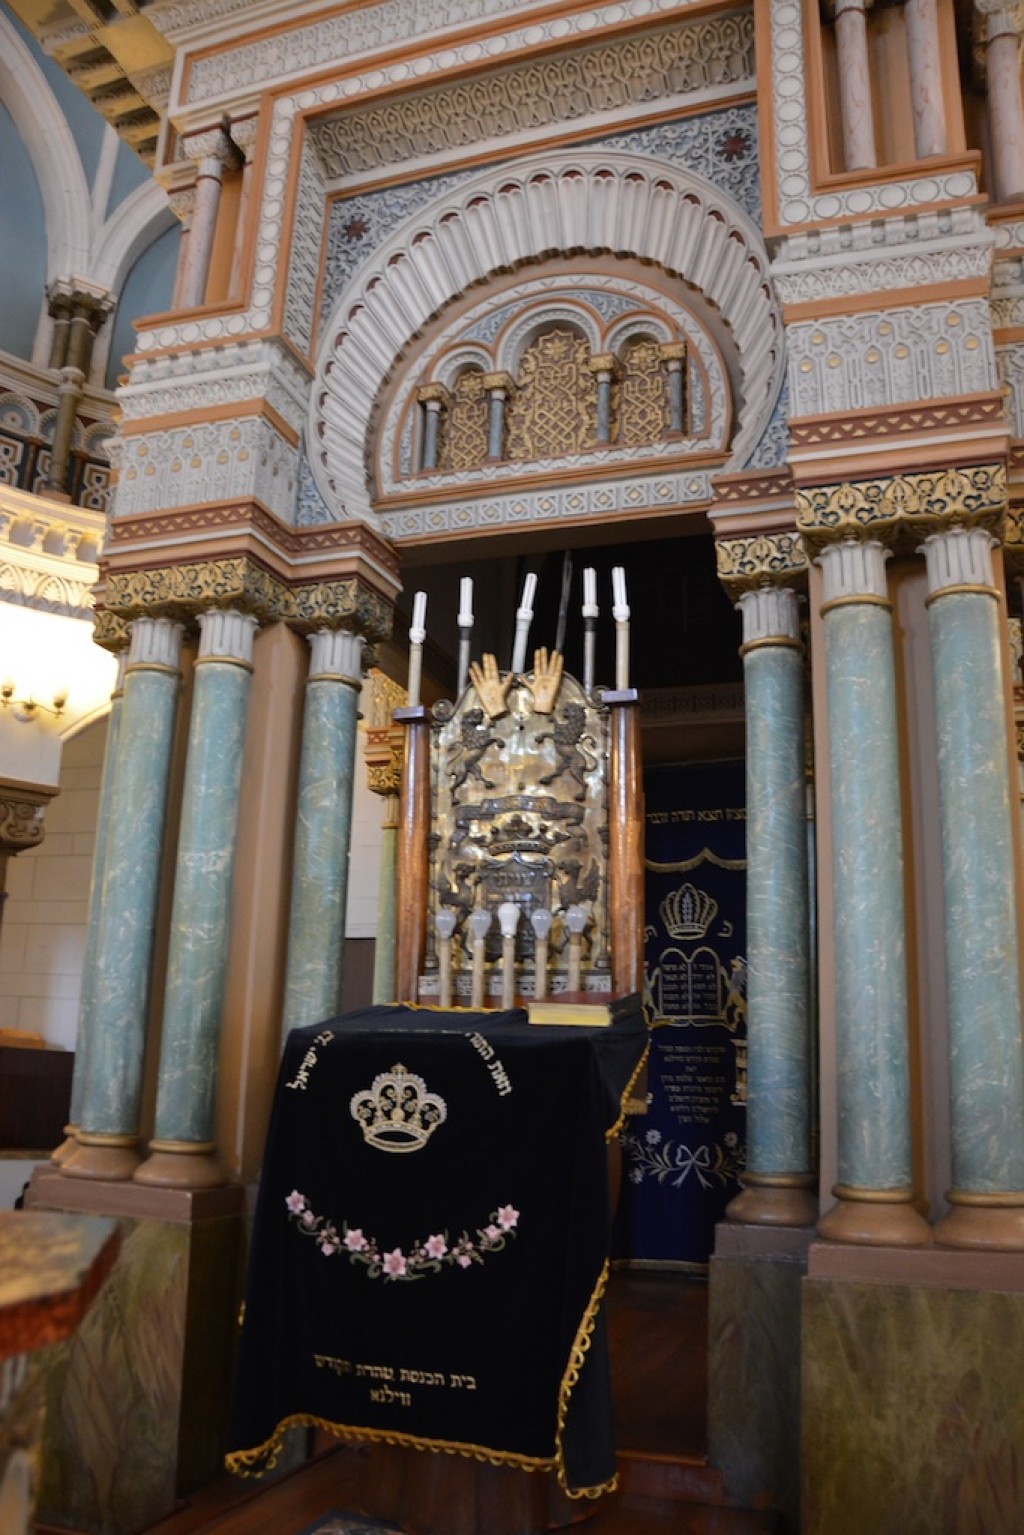 Inside the Choral Synagogue
